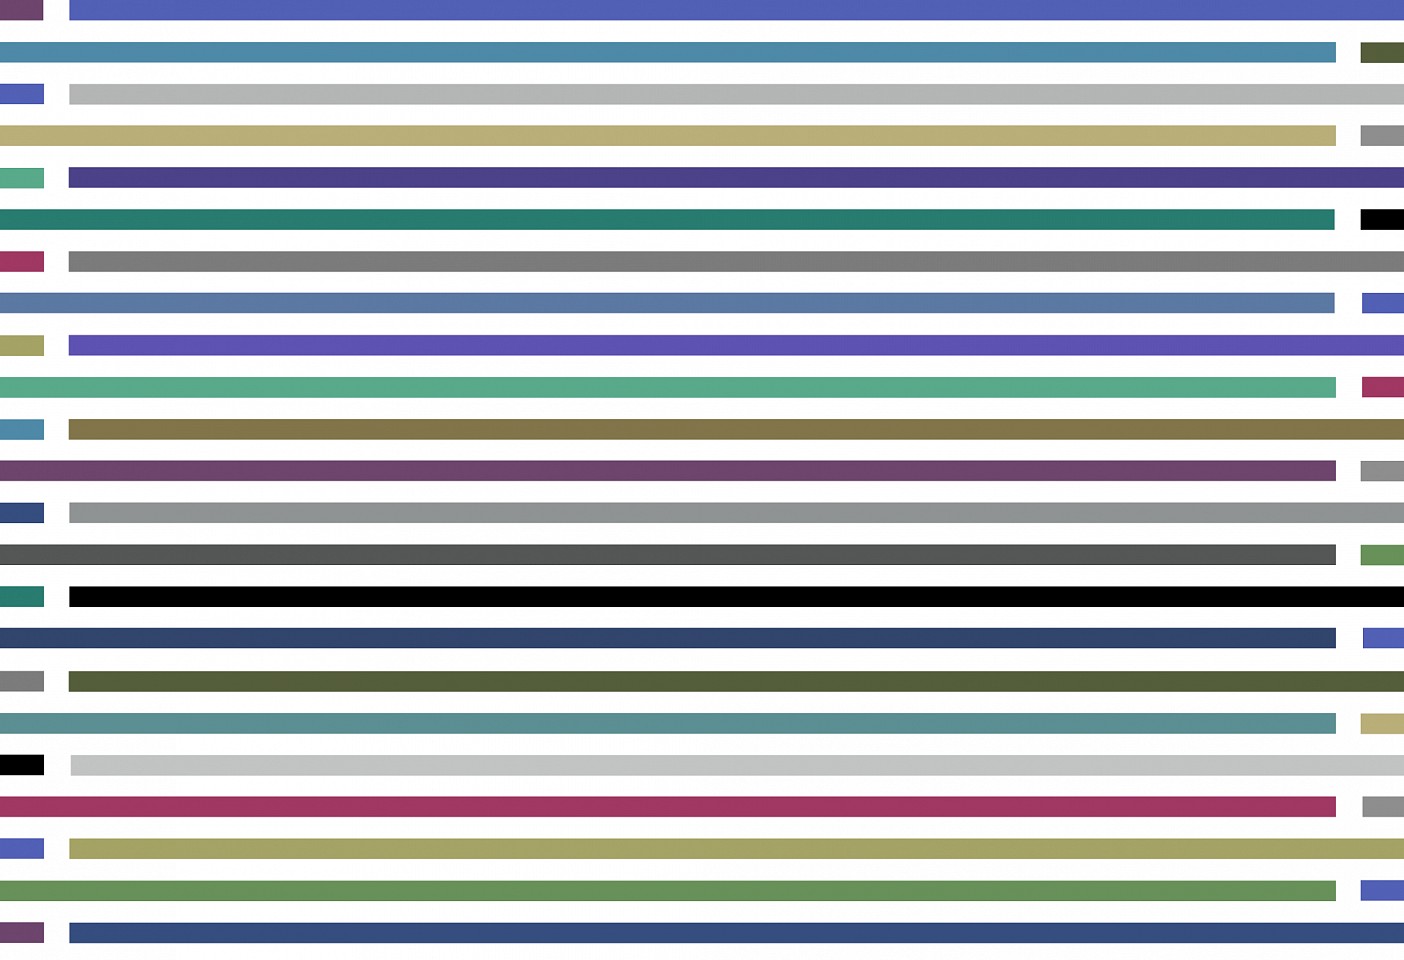 Dane Albert, Color Sticks #28, 2023
Acrylic on canvas (Concept), 48 x 72 in. (121.9 x 182.9 cm)
Series of colored lines and shapes in multiple configurations
DA.2023.sticks-028